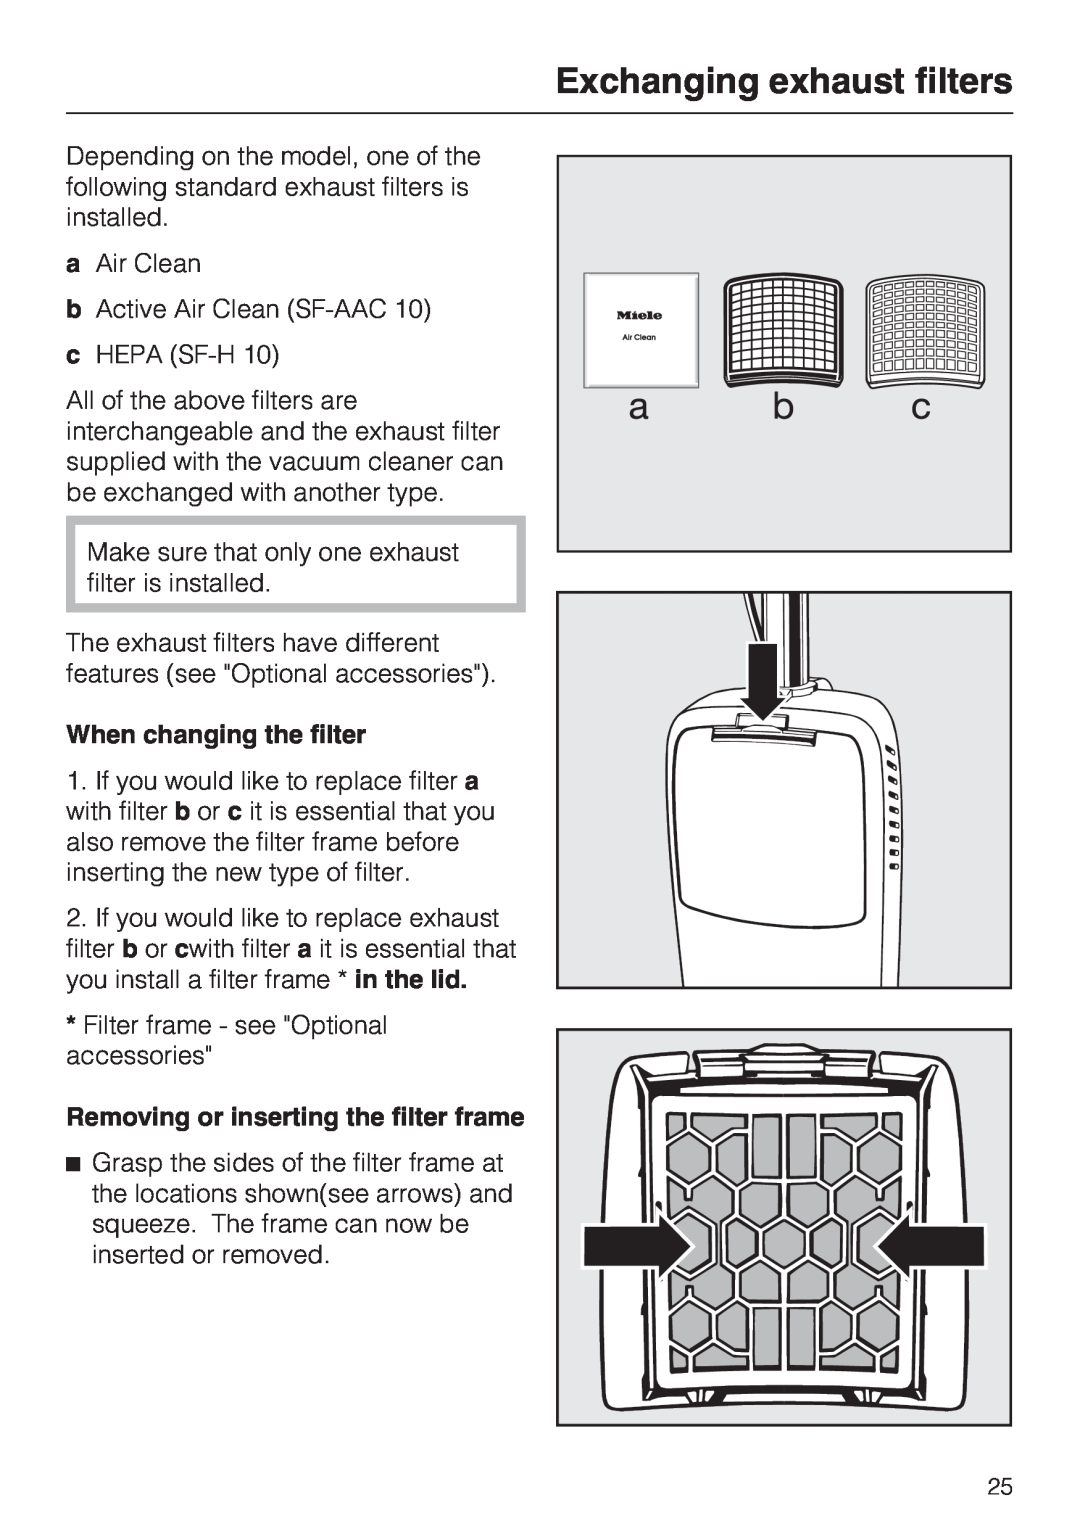 Miele S 190 Exchanging exhaust filters, When changing the filter, Removing or inserting the filter frame 